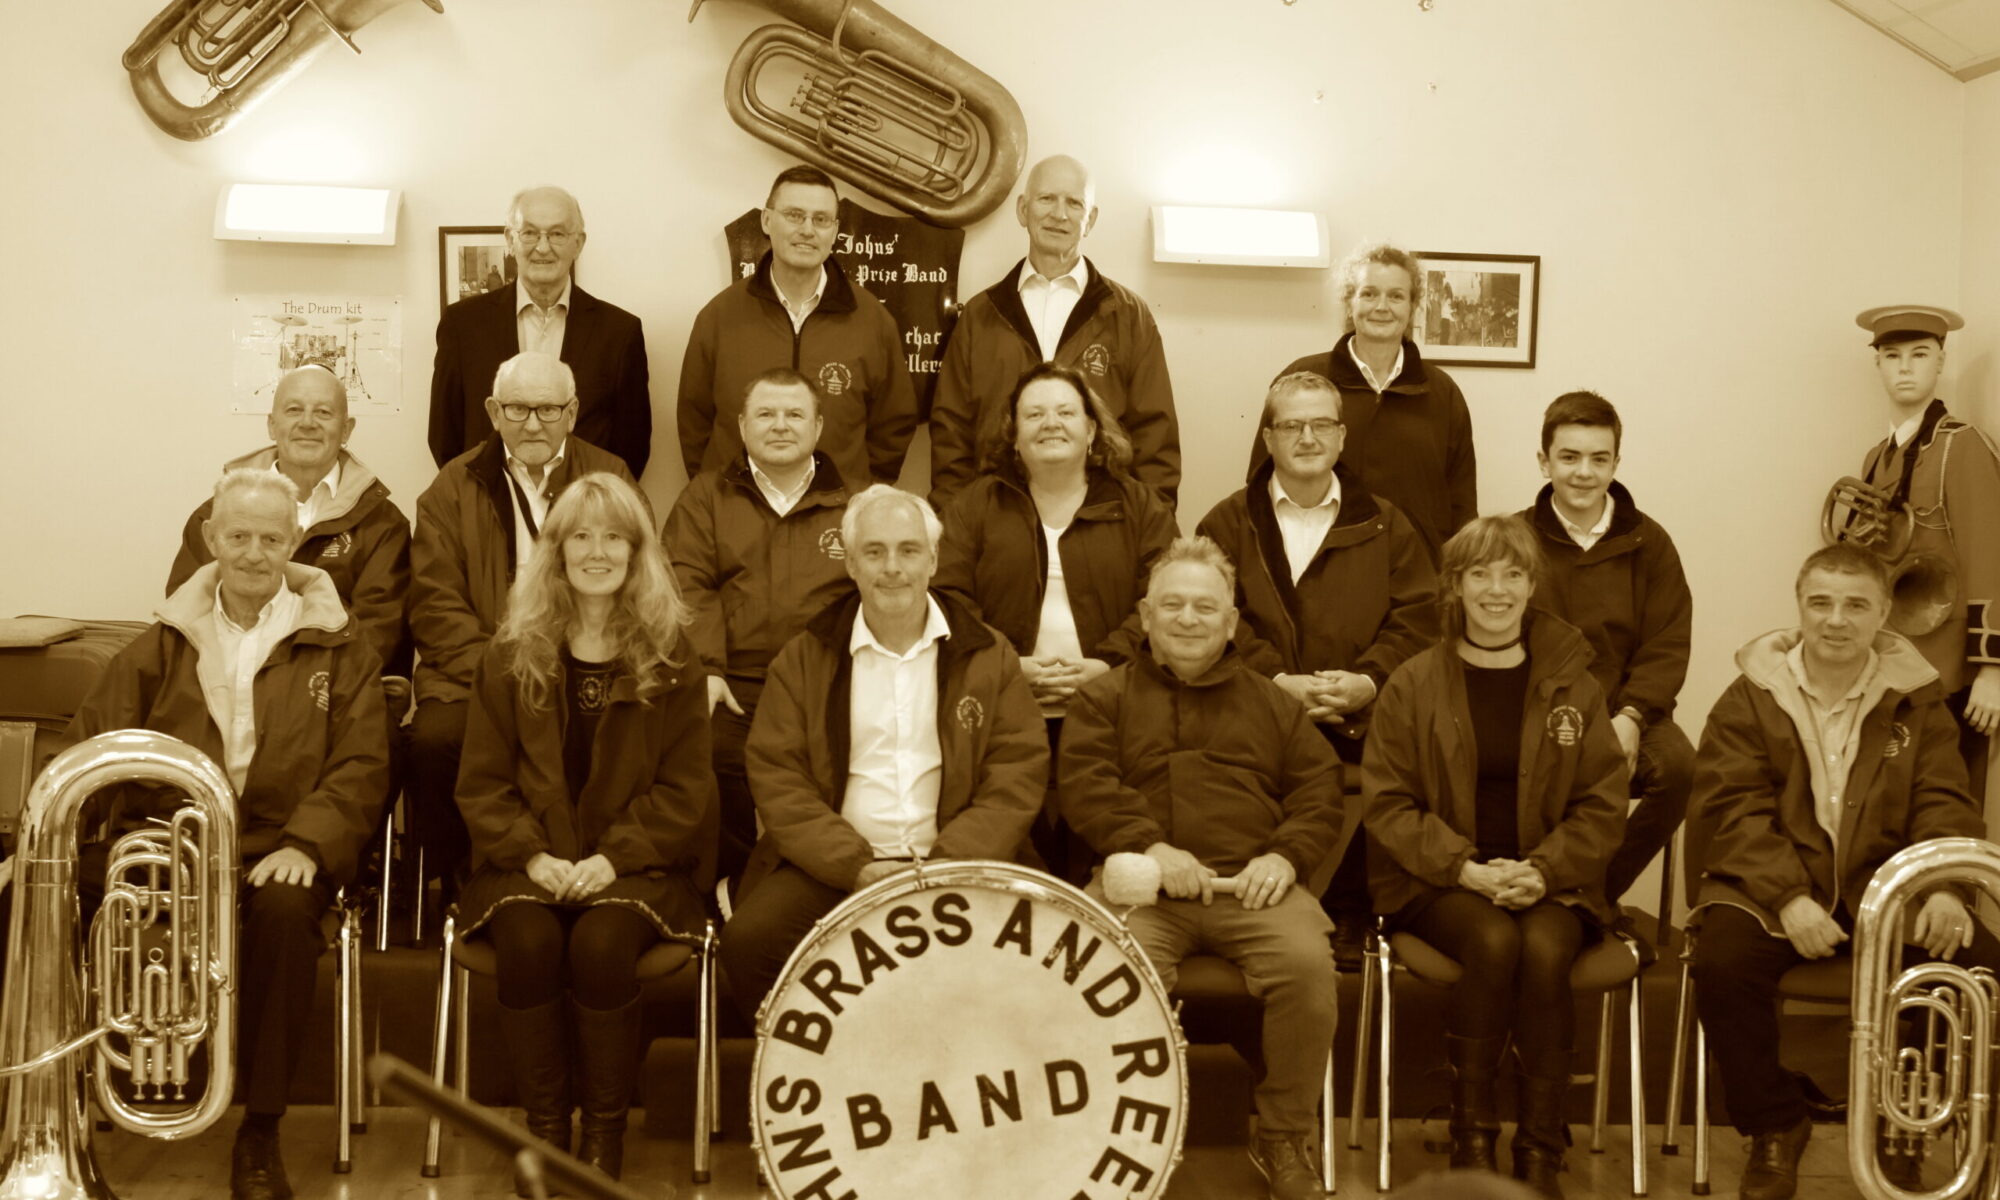 Home - St. John's Brass and Reed Band